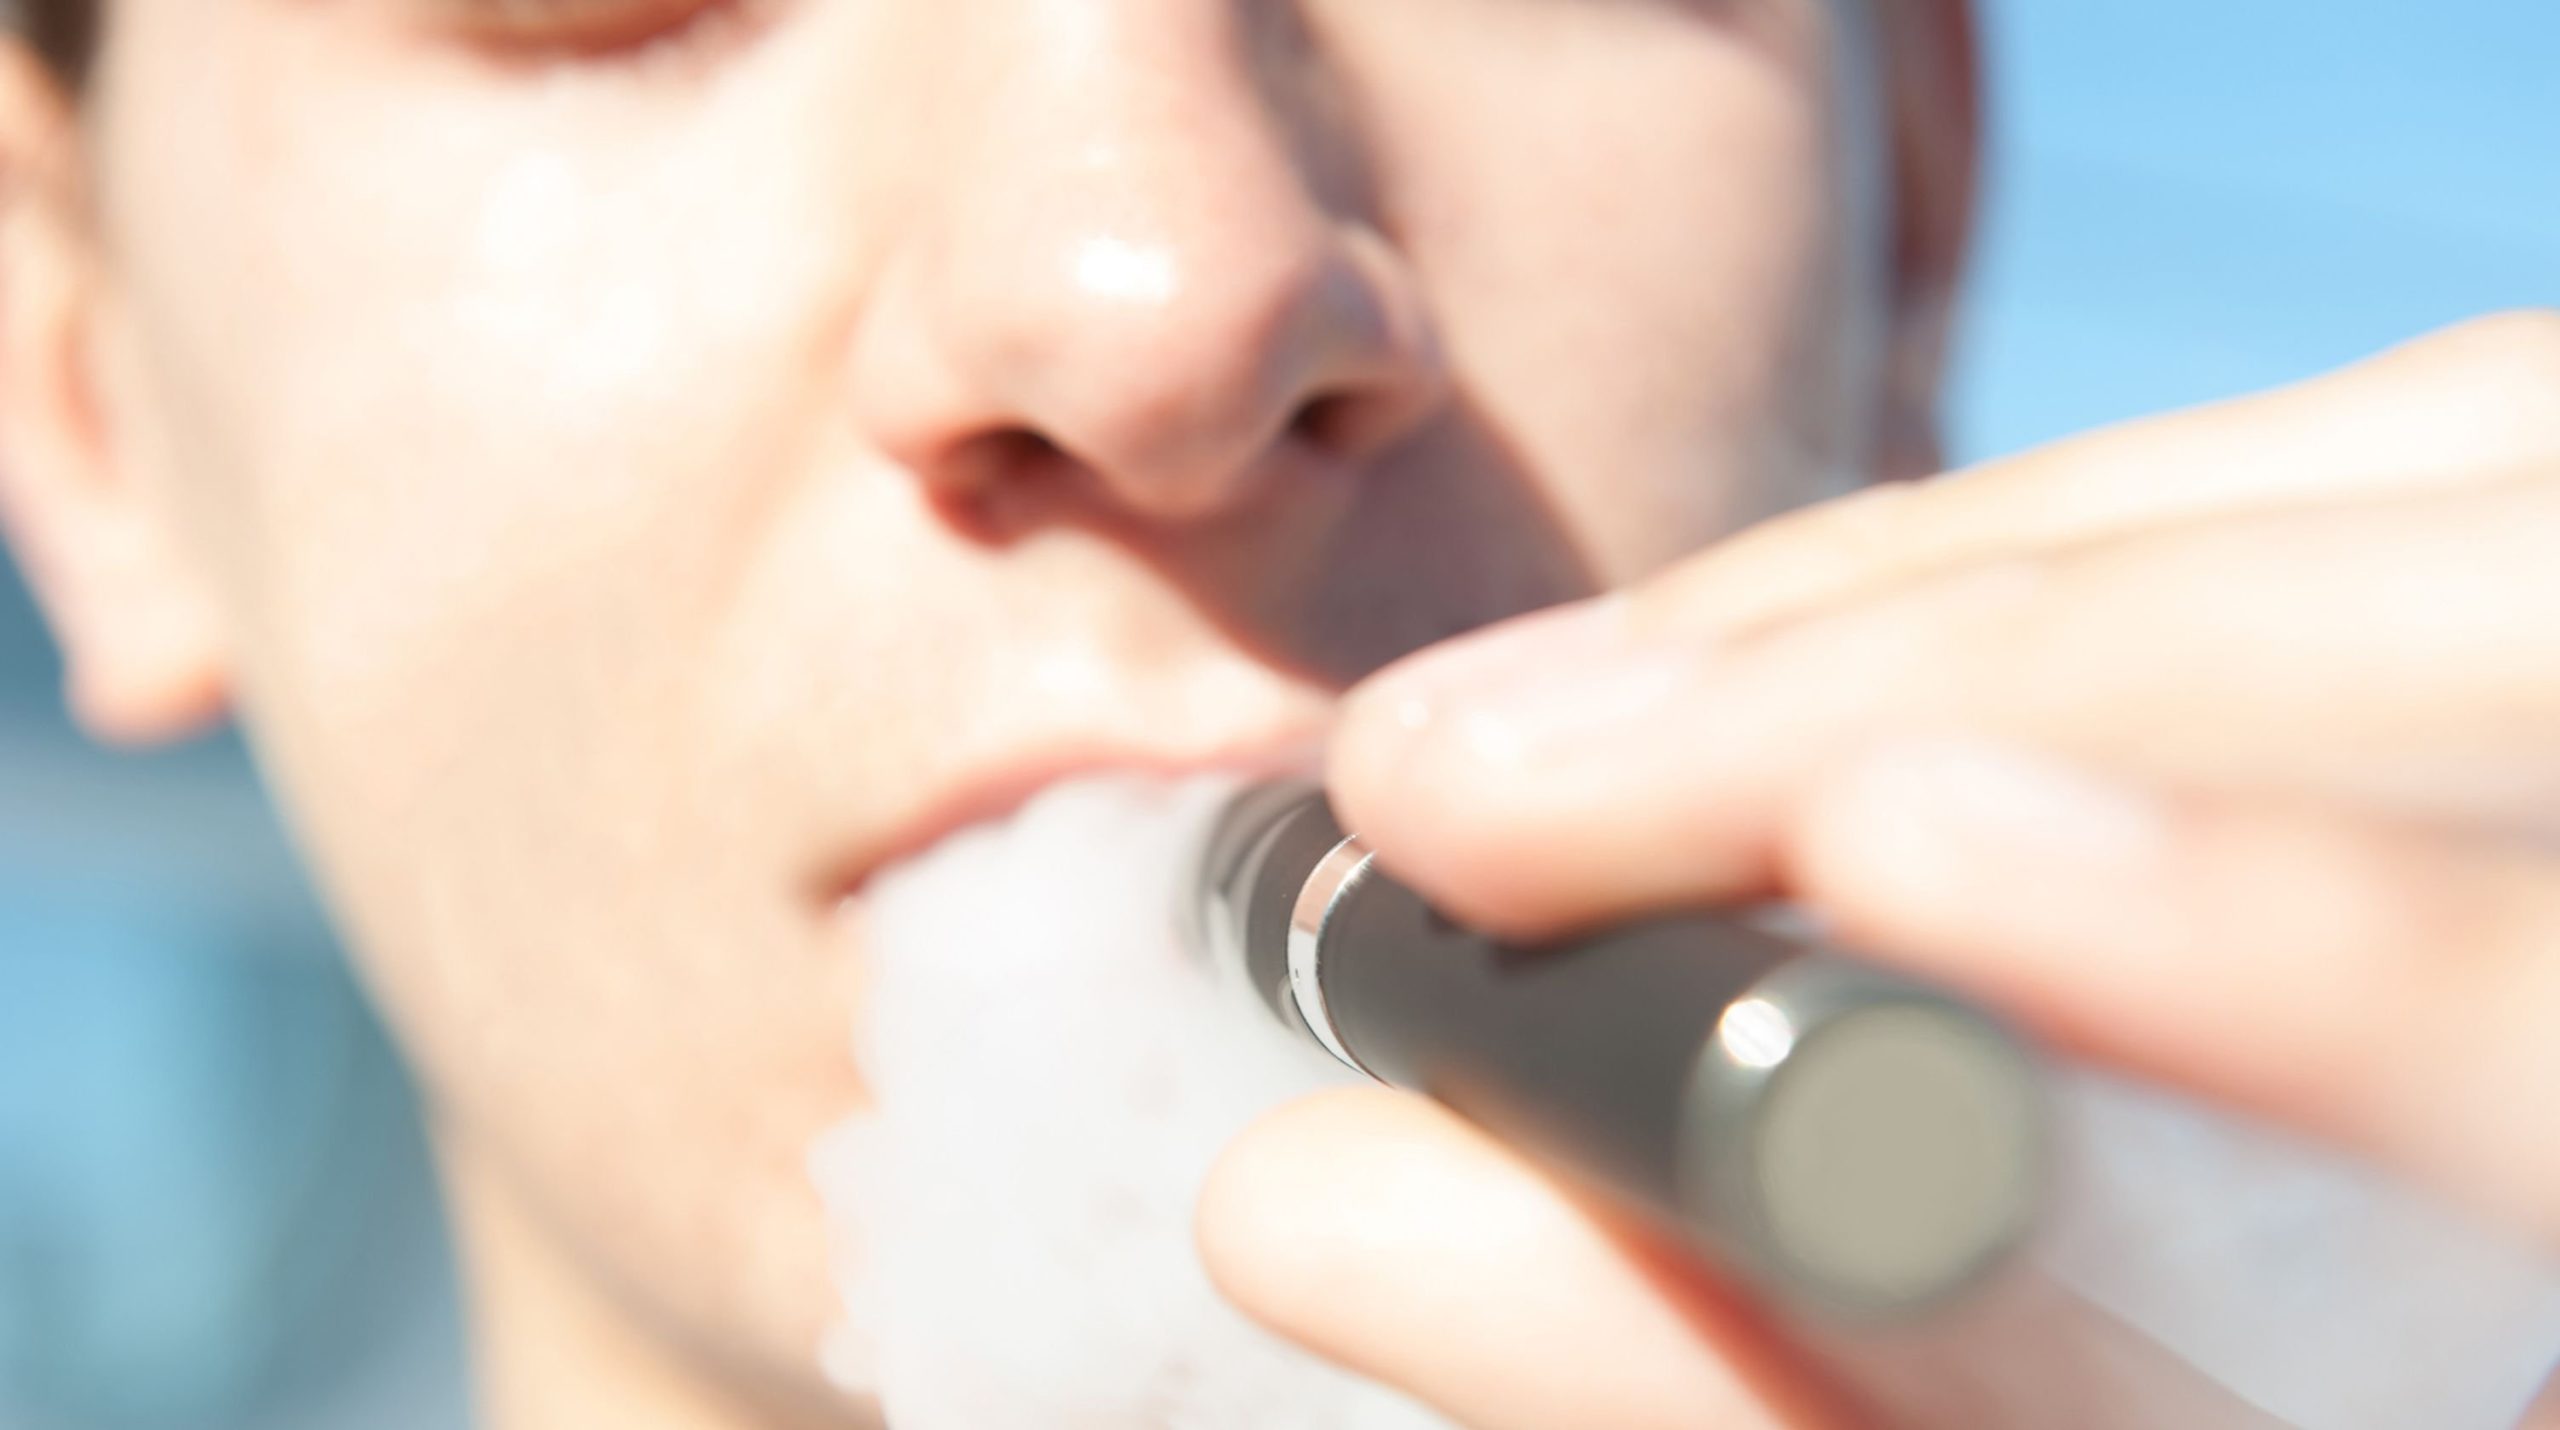 More teens are vaping marijuana than we thought, researchers say